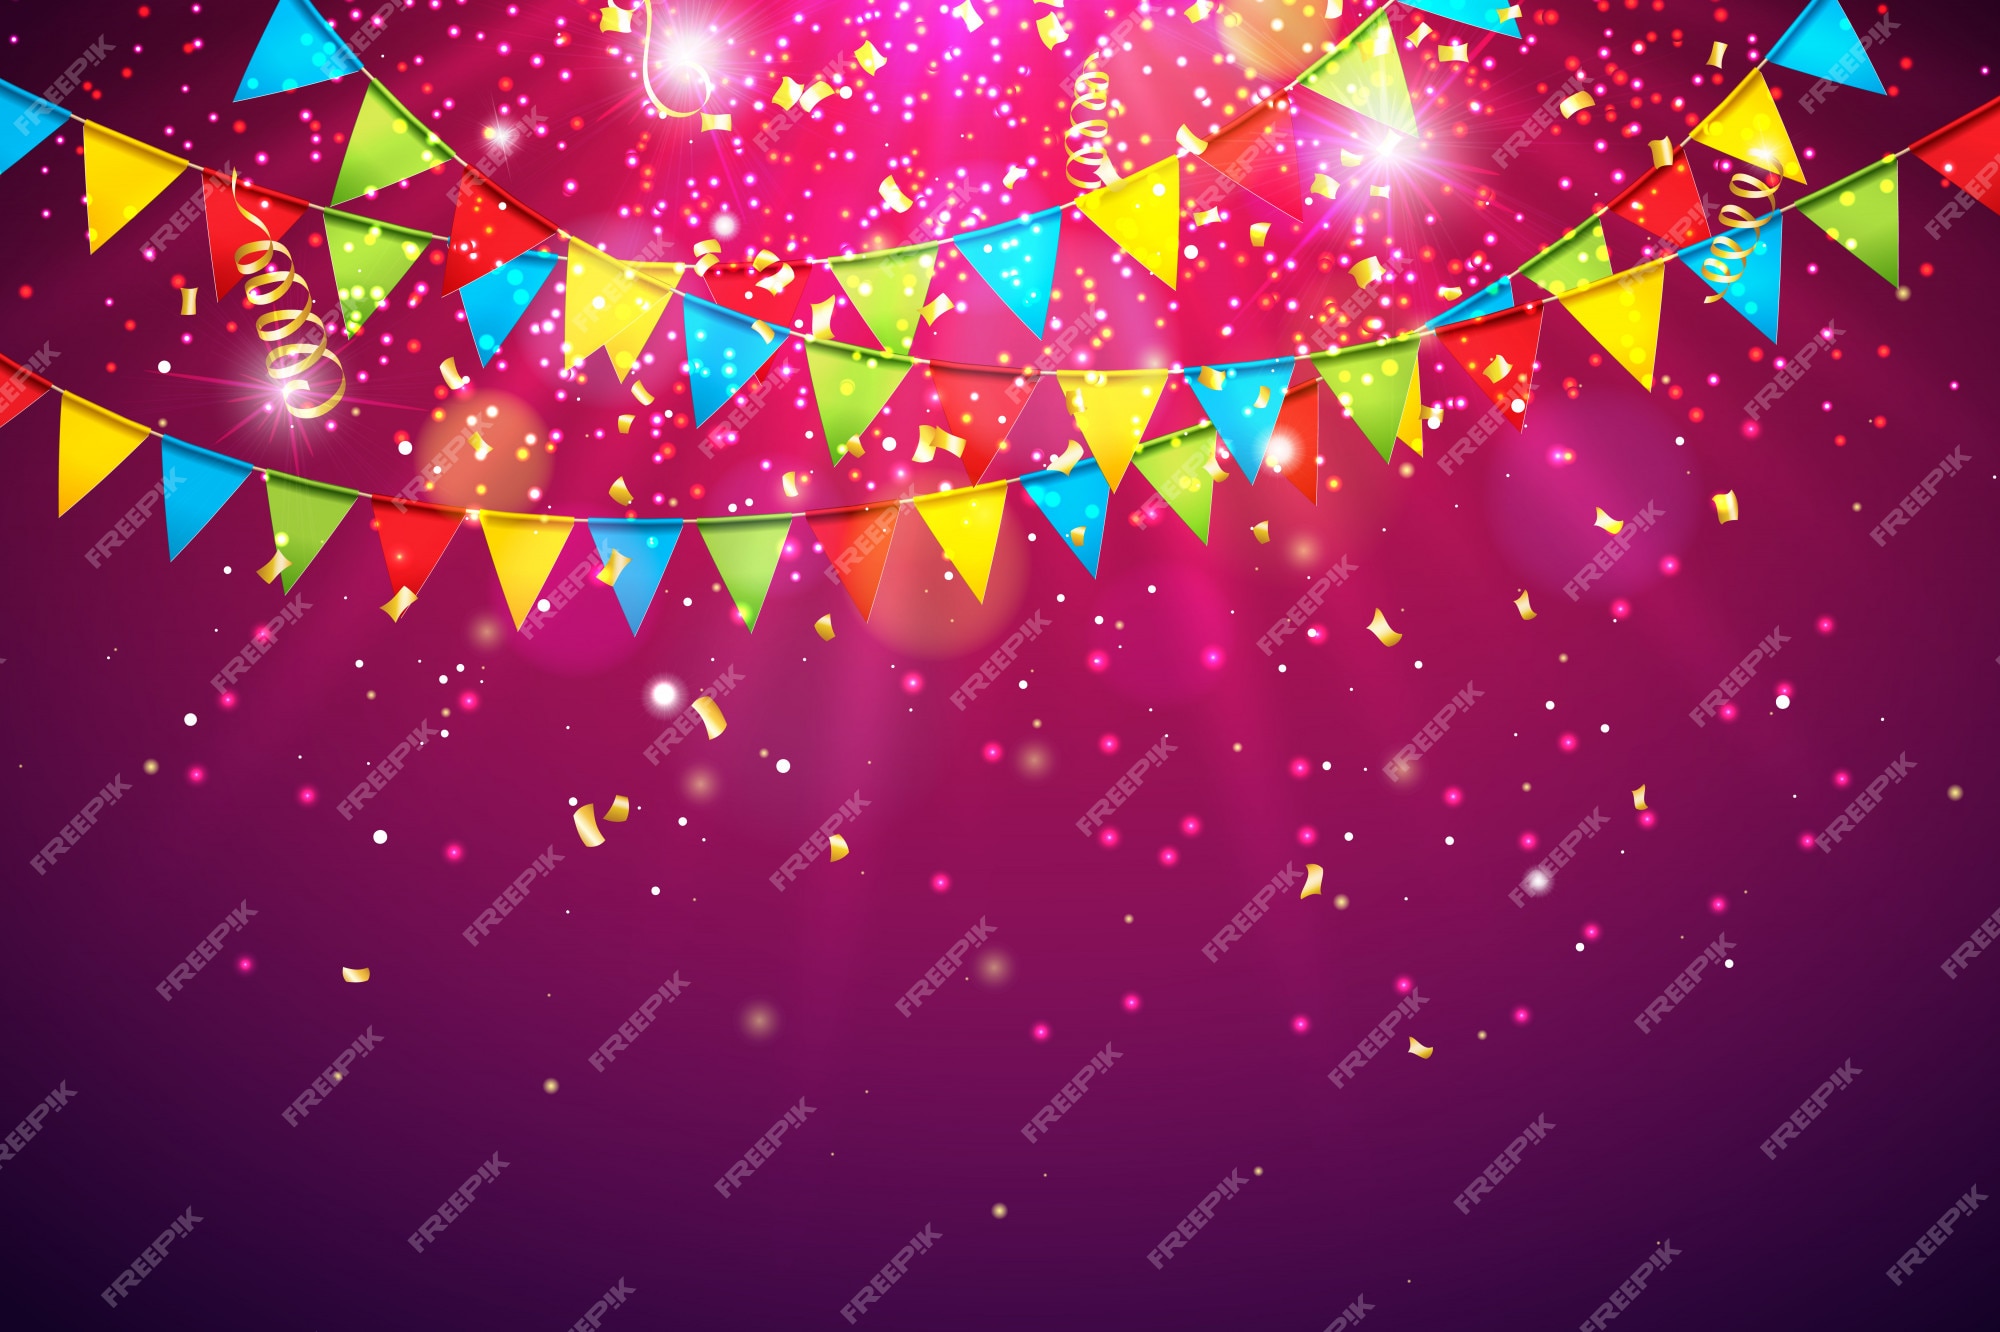 Details 100 background for party